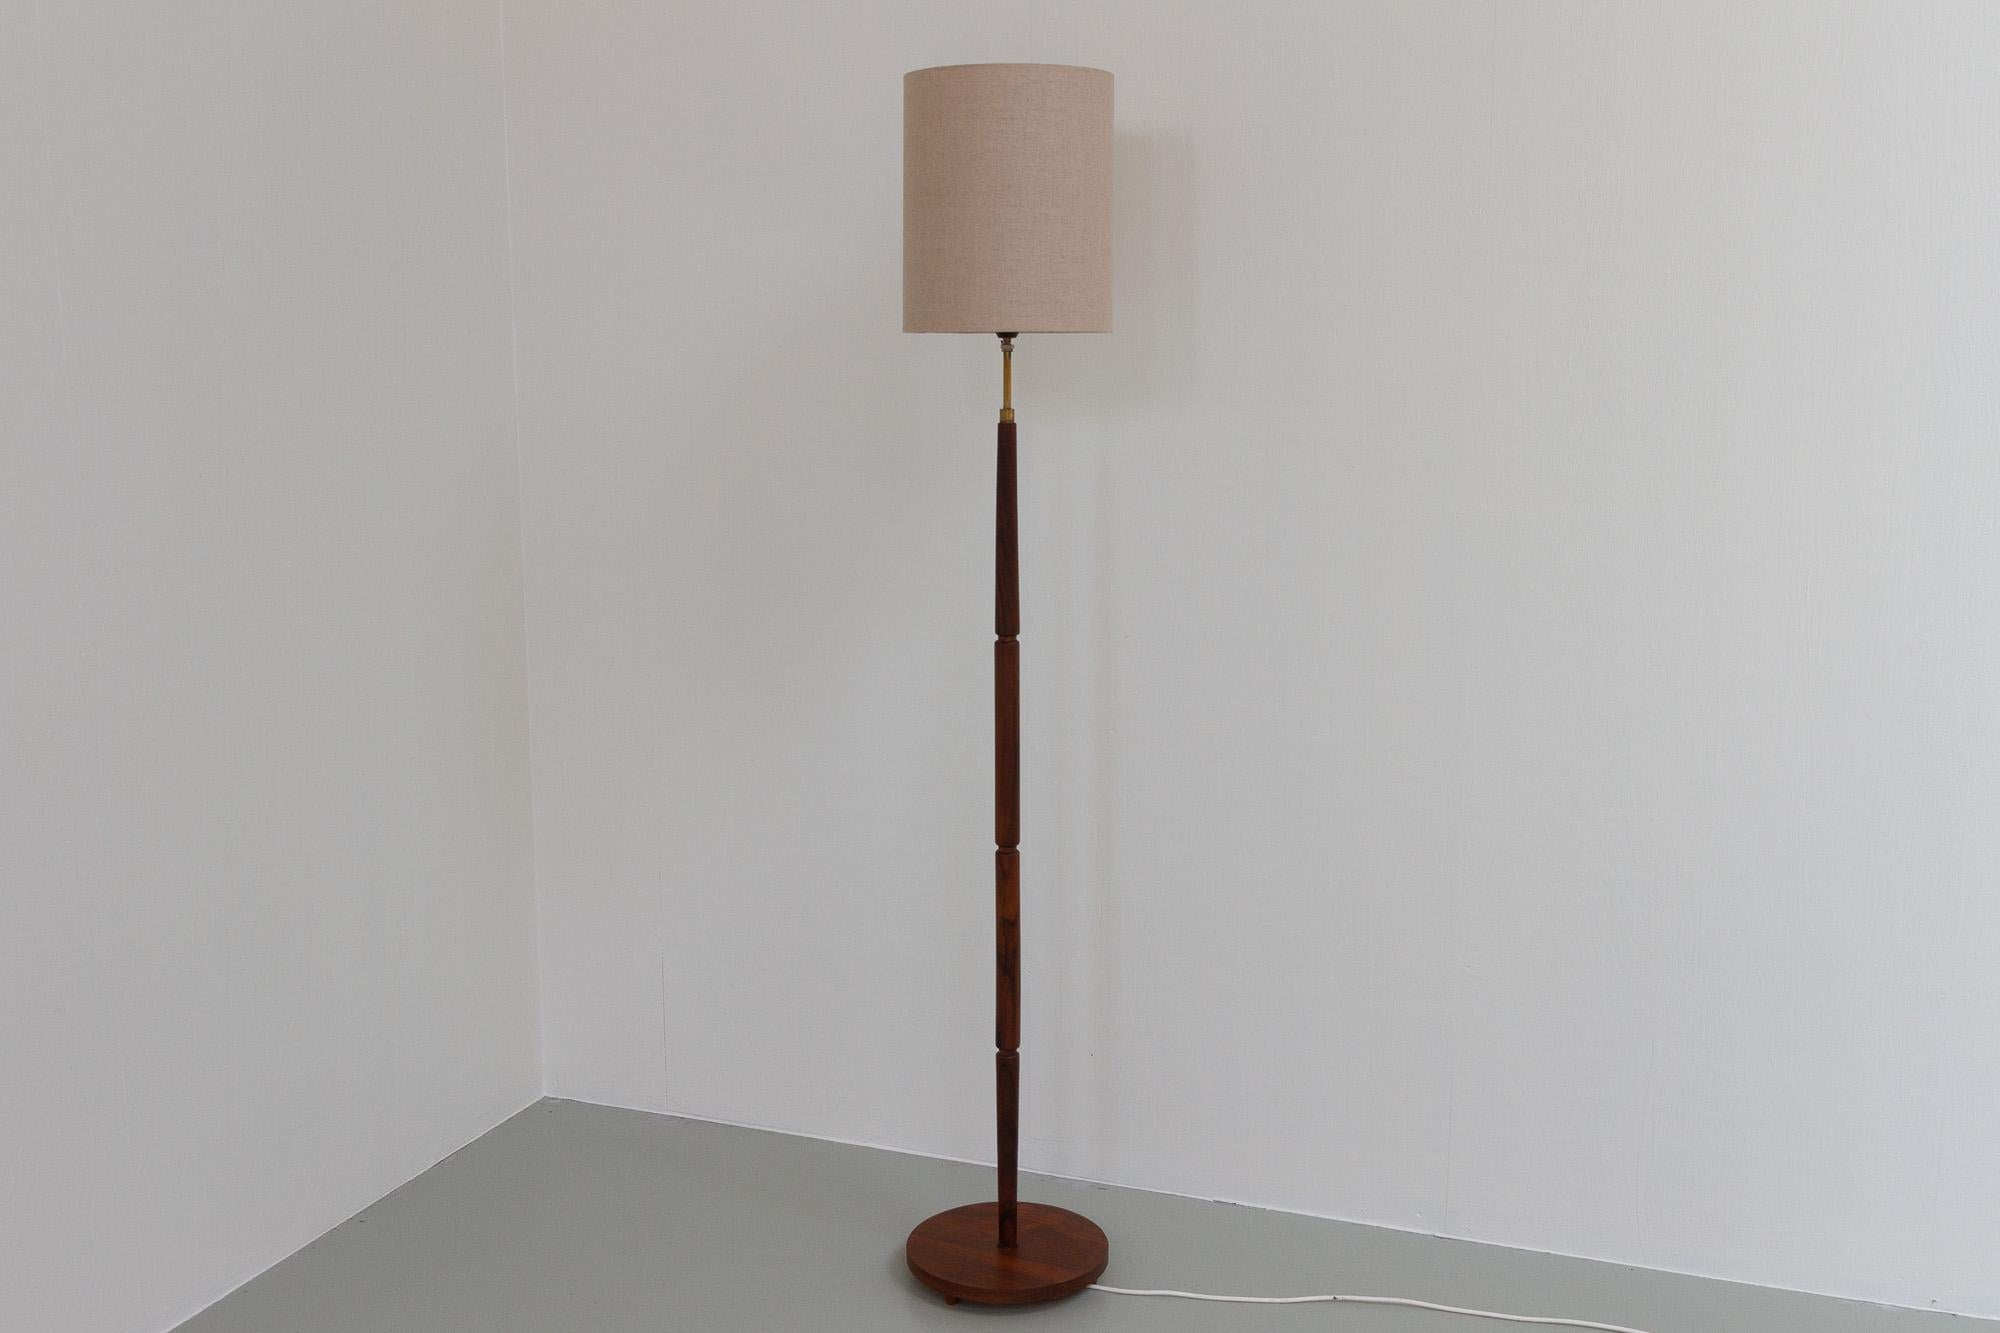 Midcentury Danish Rosewood Floor Lamp, 1960s. 
Beautiful and stylish Scandinavian Modern floor lamp in Rosewood/Palisander and brass made in Denmark in the 1960s. 
Stem with four round pieces of solid Rosewood, top and bottom pieces are slightly